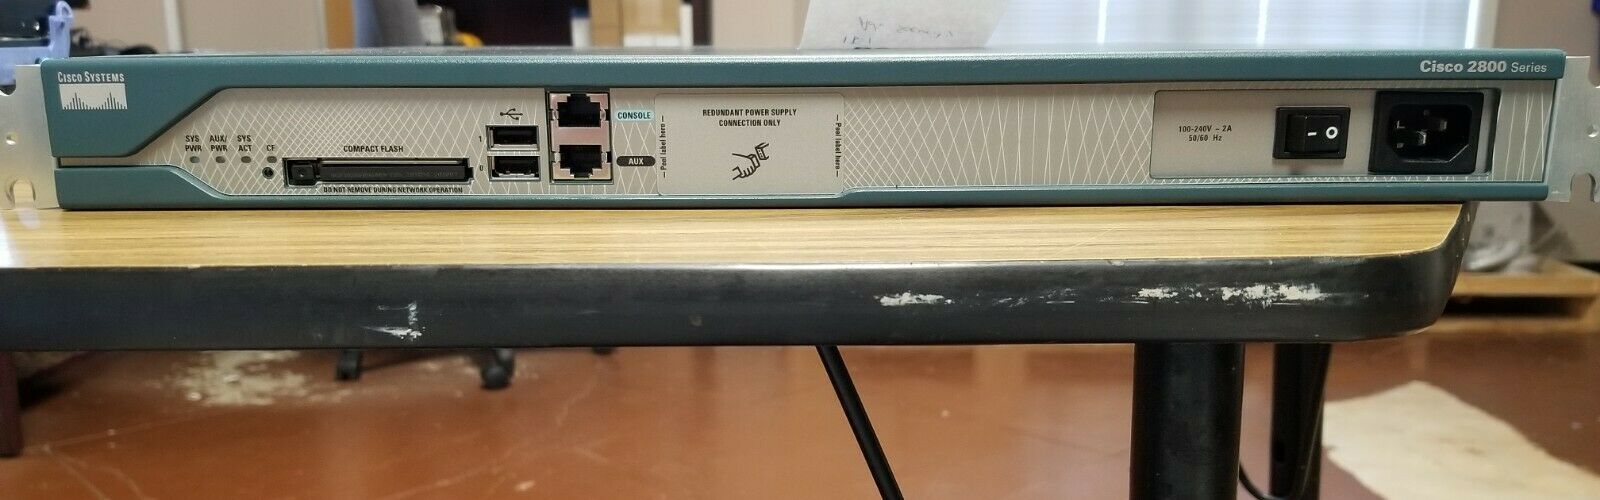 Cisco 2811 2-Port 10/100 Wired Router (CISCO2811) with 3 x Line Cards